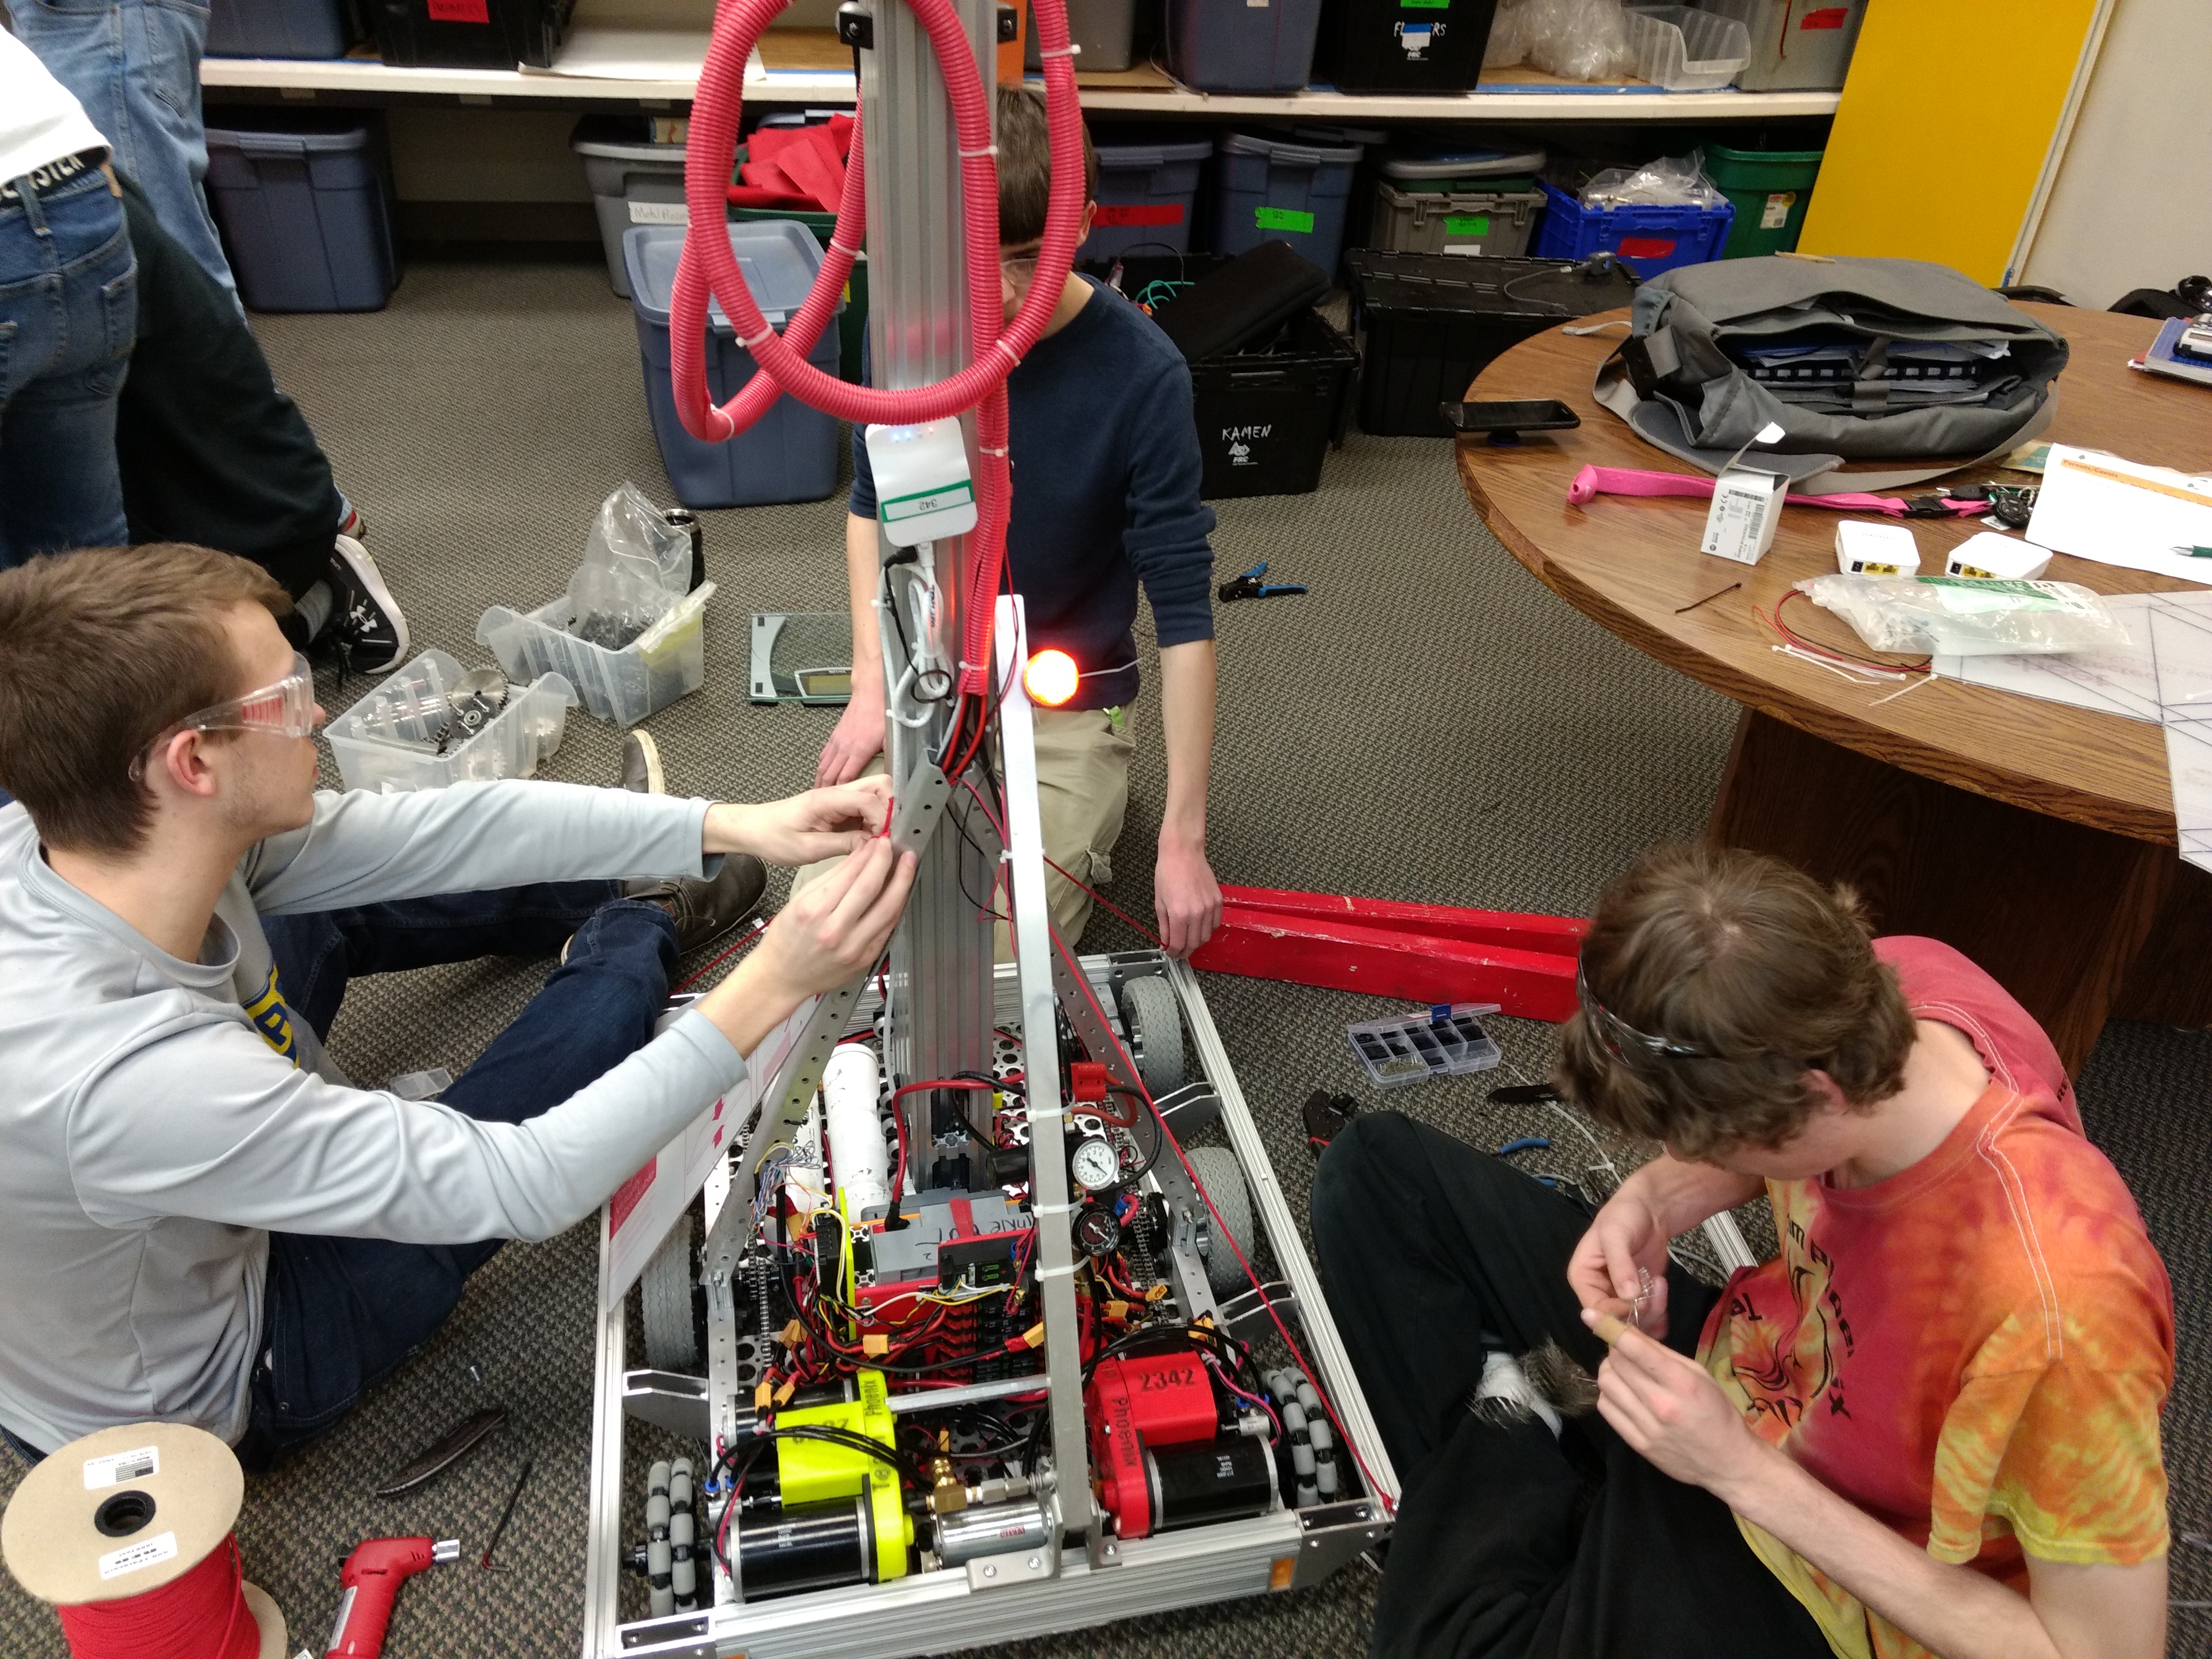 Putting the robot together